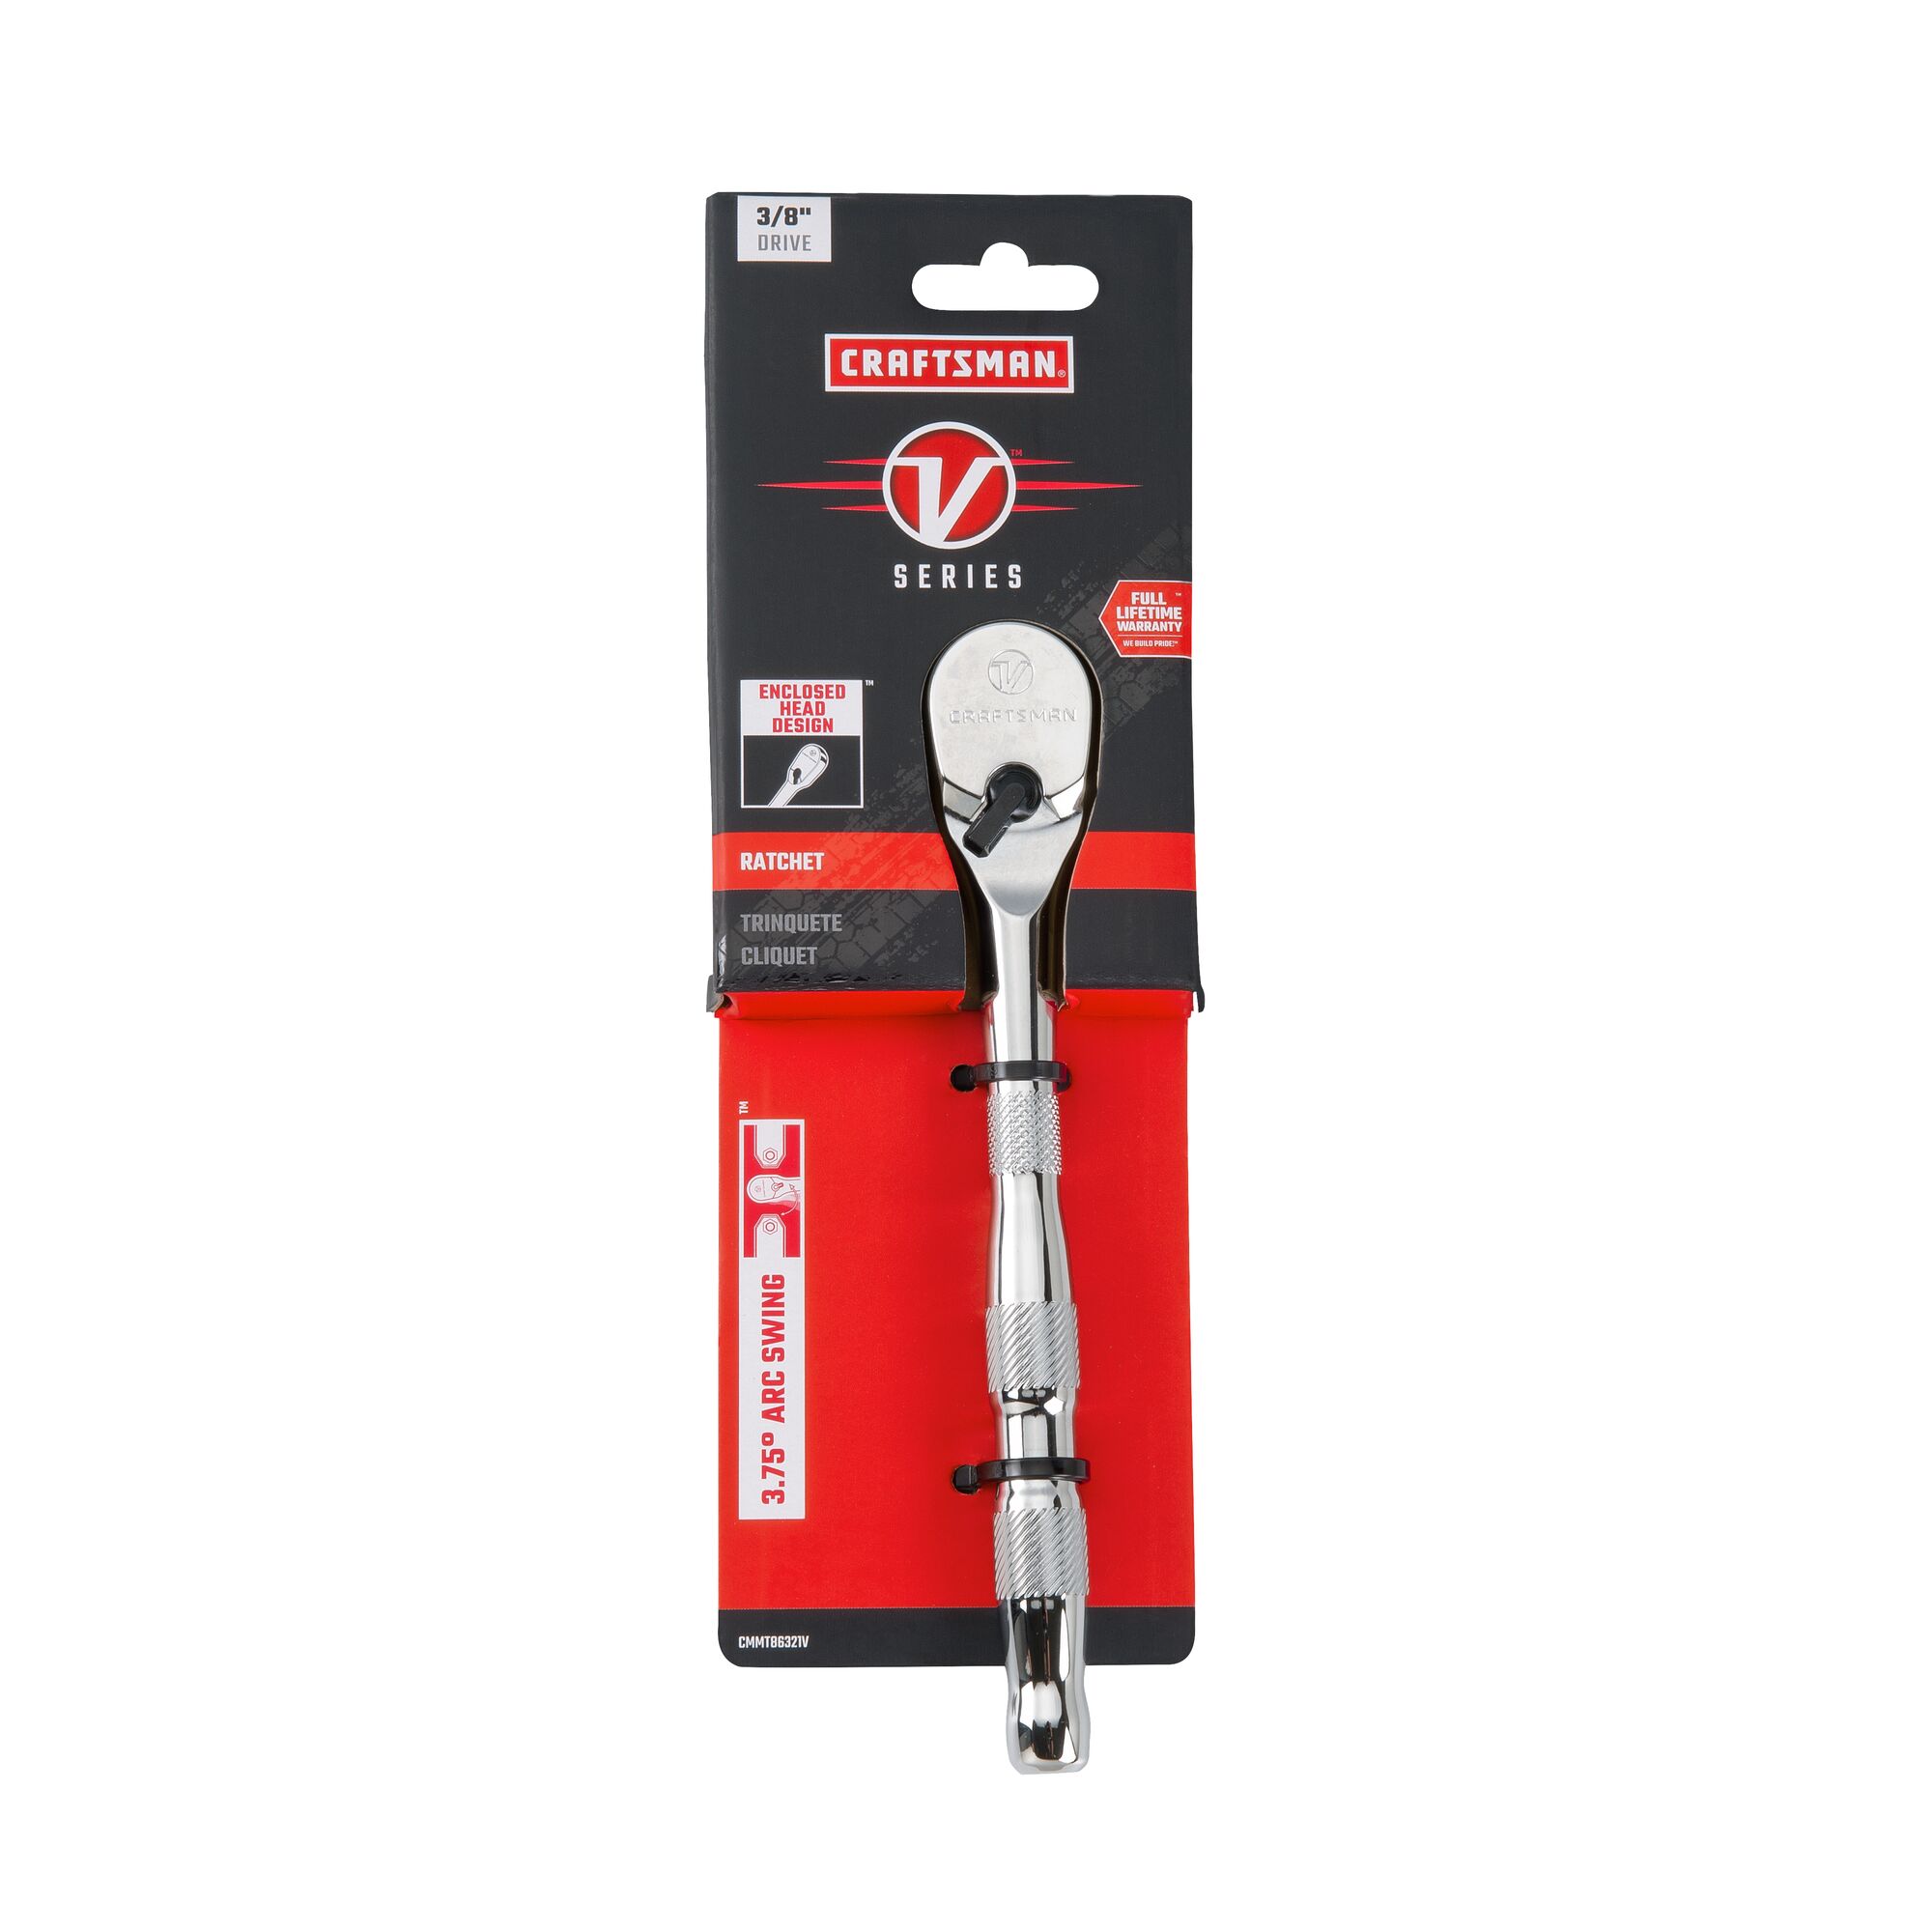 V series three eighth inch drive ratchet in packaging.